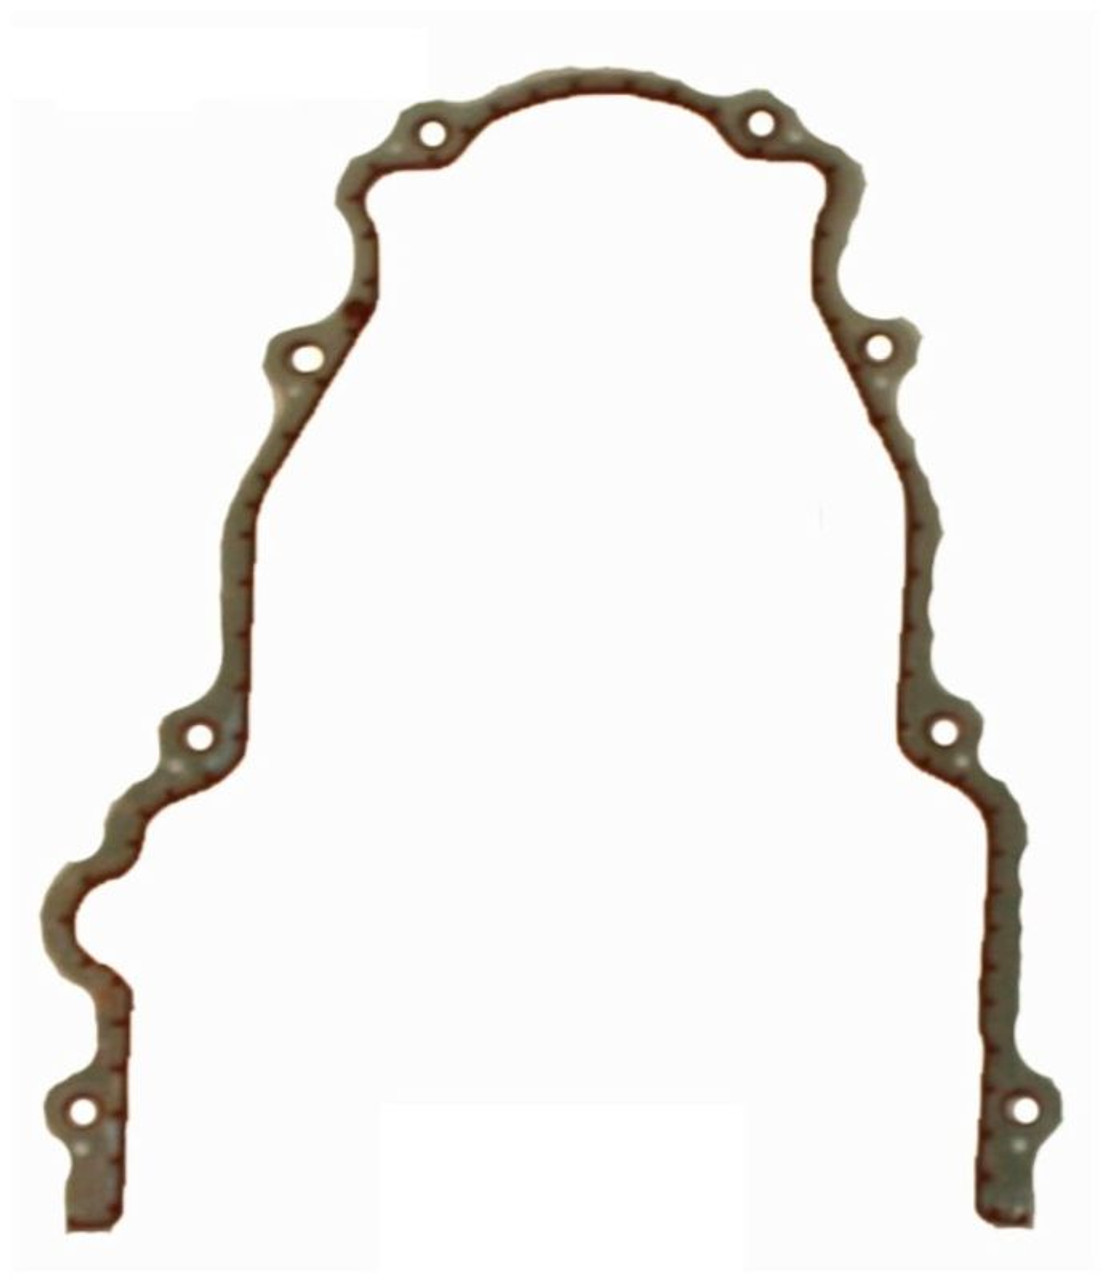 2012 Chevrolet Tahoe 5.3L Engine Timing Cover Gasket TCG293-A -788